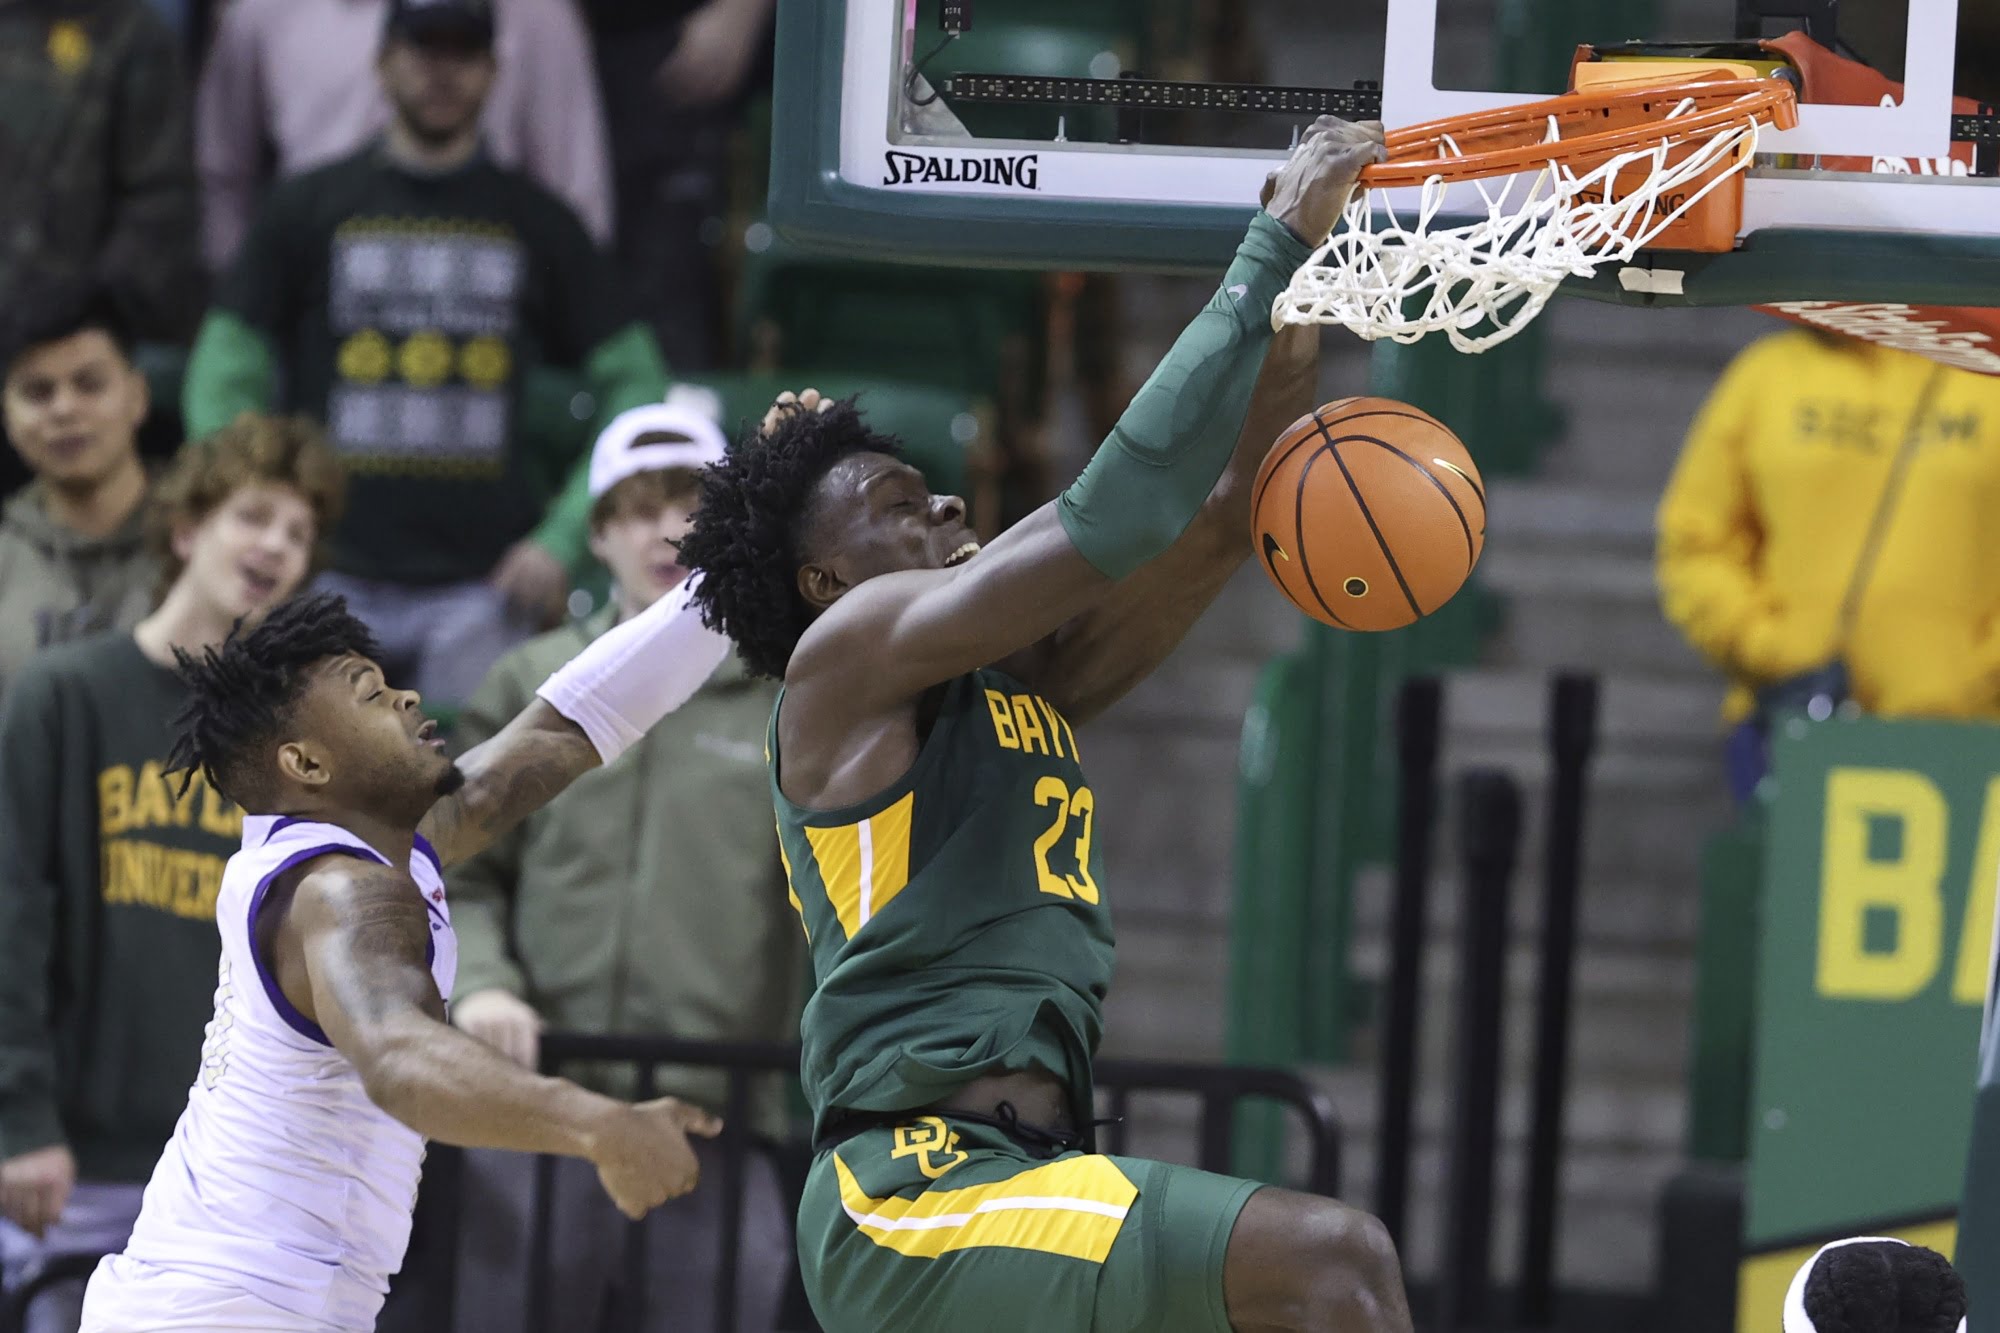 Baylor stays No. 1 in AP Top 25, Michigan State up to No. 10 6